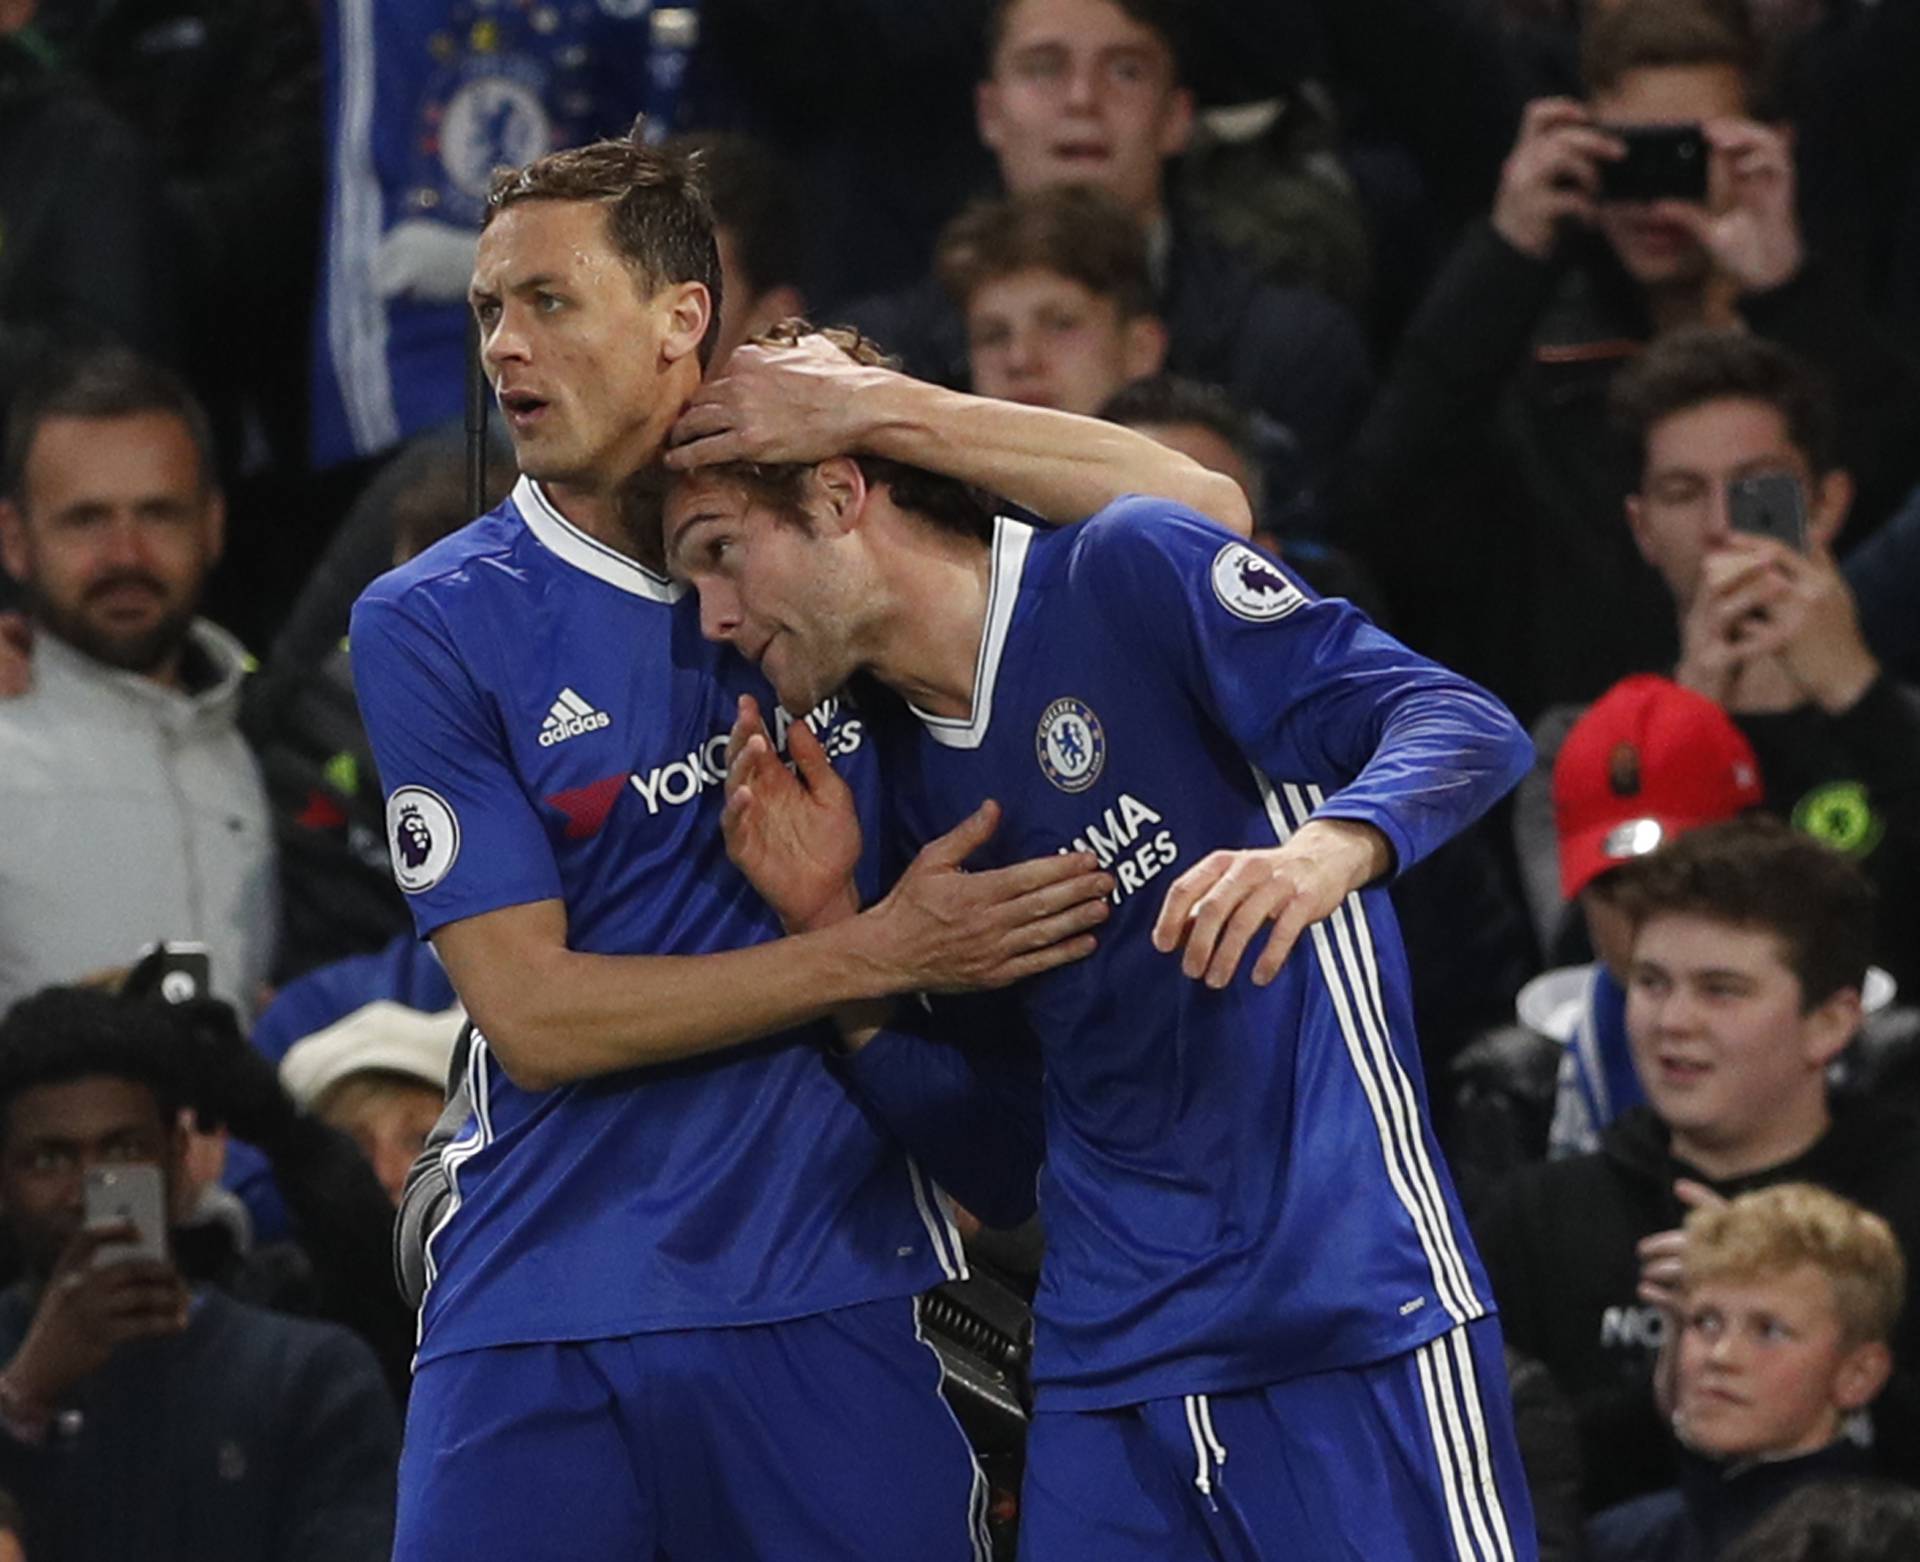 Chelsea's Marcos Alonso celebrates scoring their second goal with Nemanja Matic